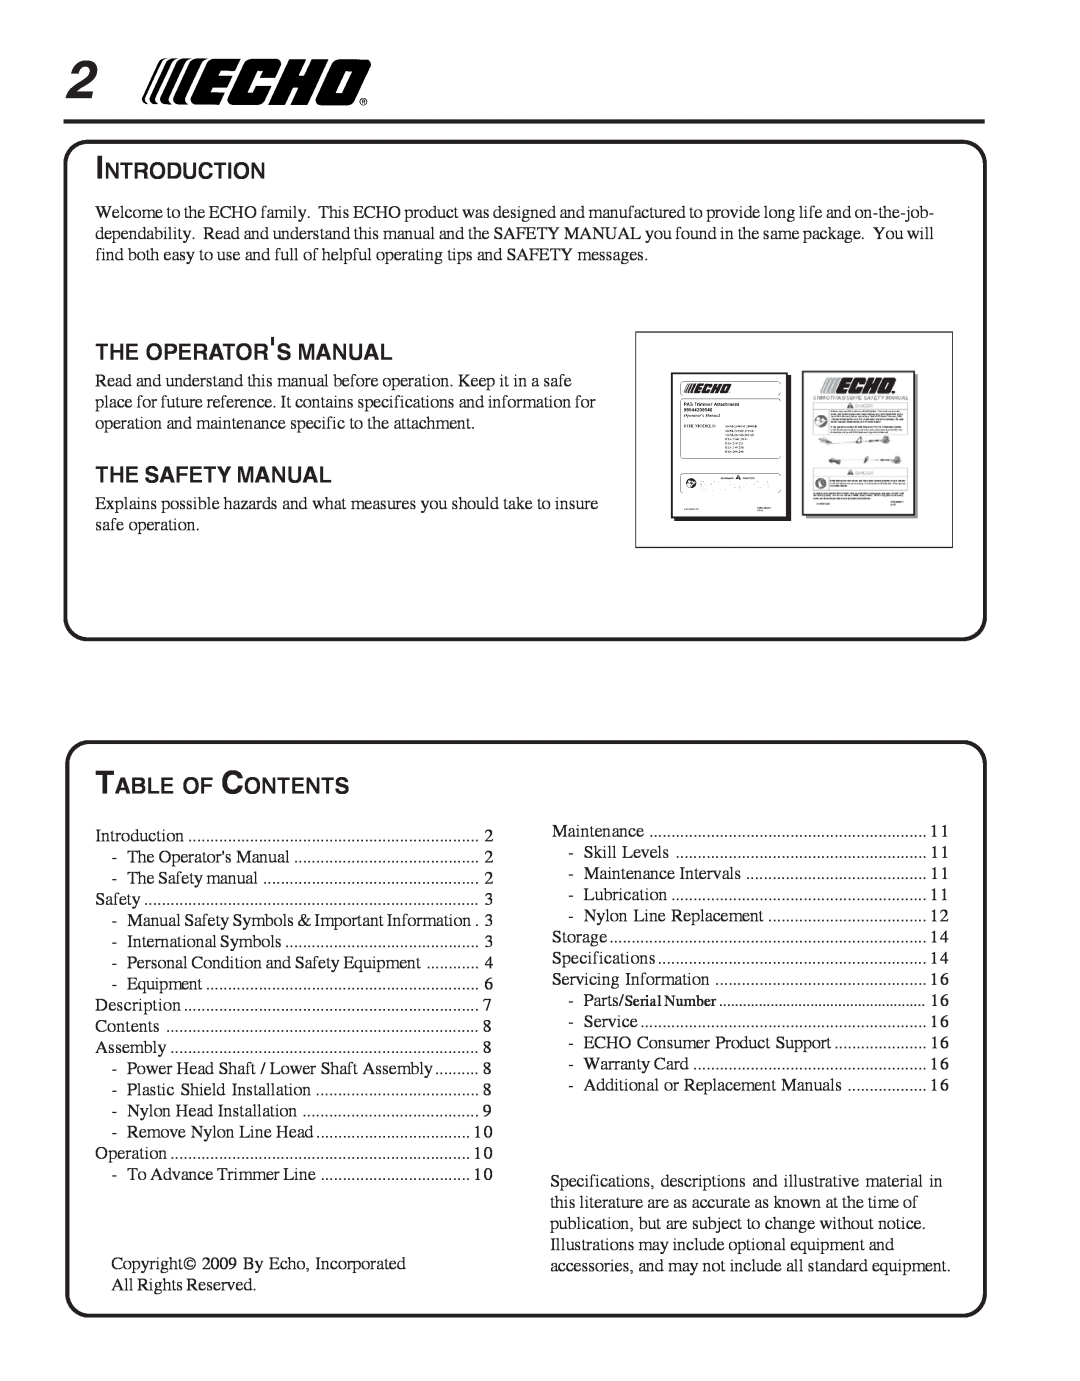 Echo PAS-265, PAS-230, 99944200545, SRM-2400SB manual Introduction, The Operators Manual, The Safety Manual, Table Of Contents 